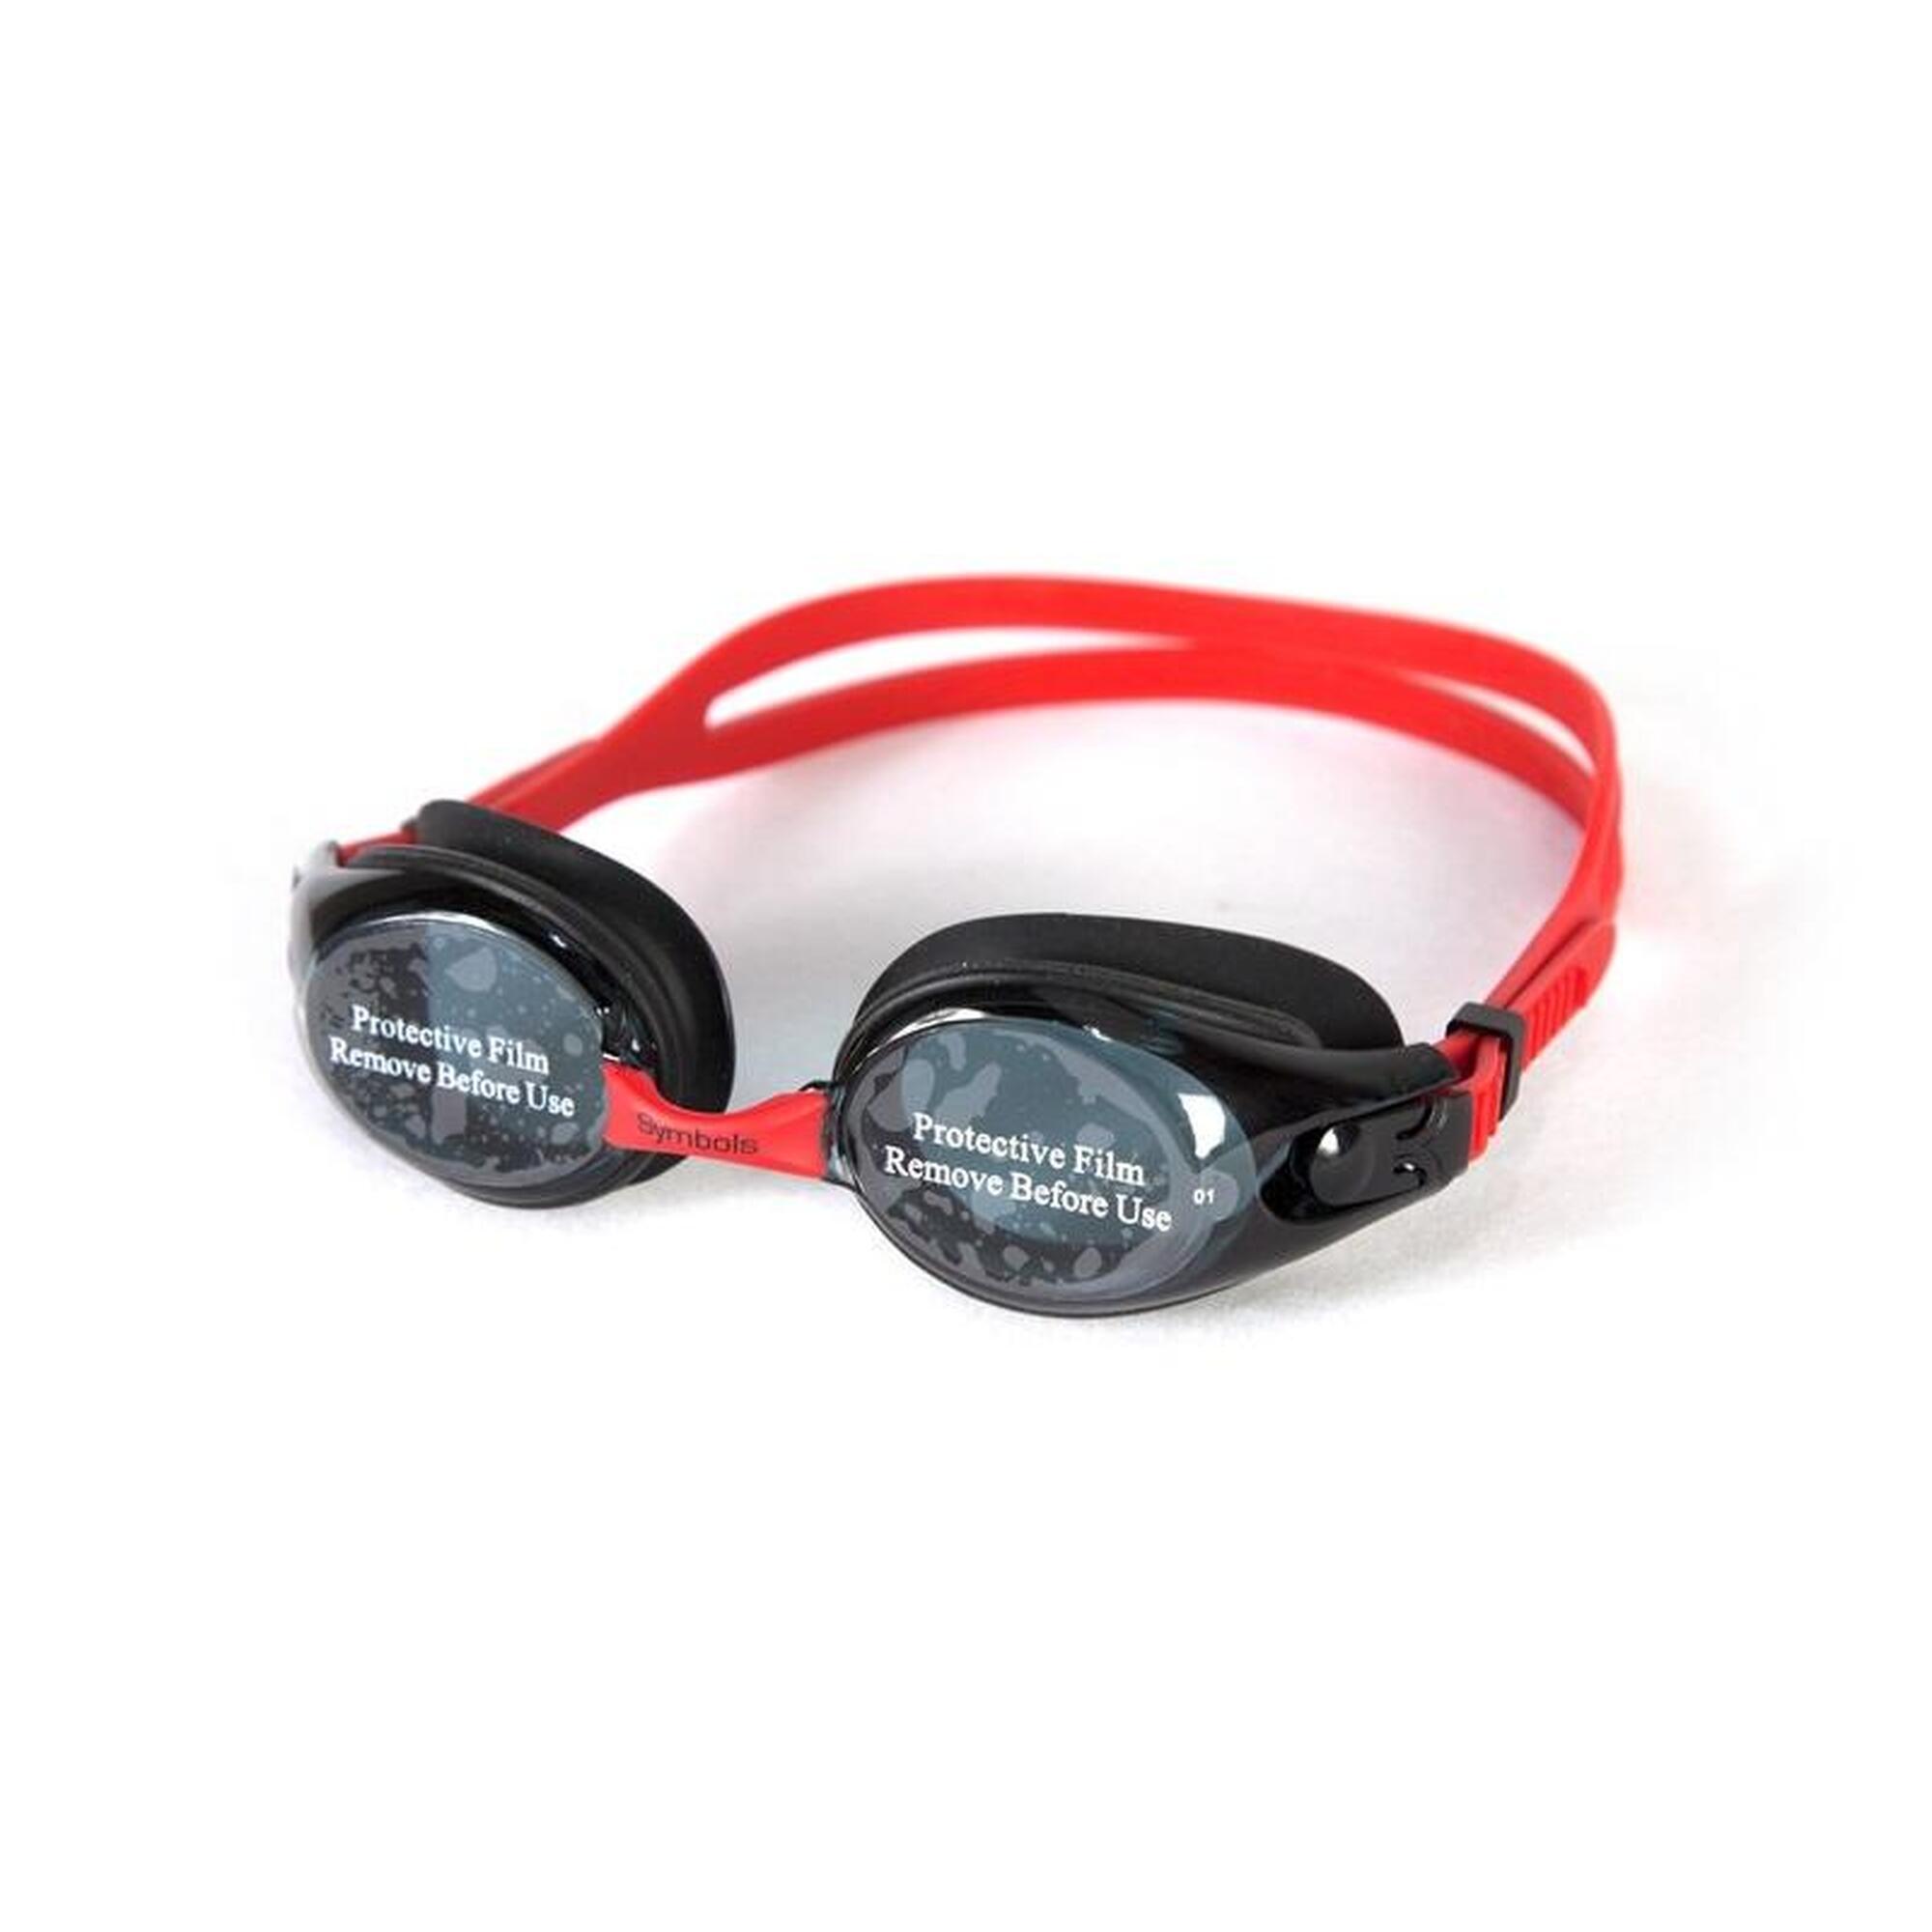 MS-6700 Silicone Anti-Fog UV Protection Optical Swimming Goggles - RED/BLACK